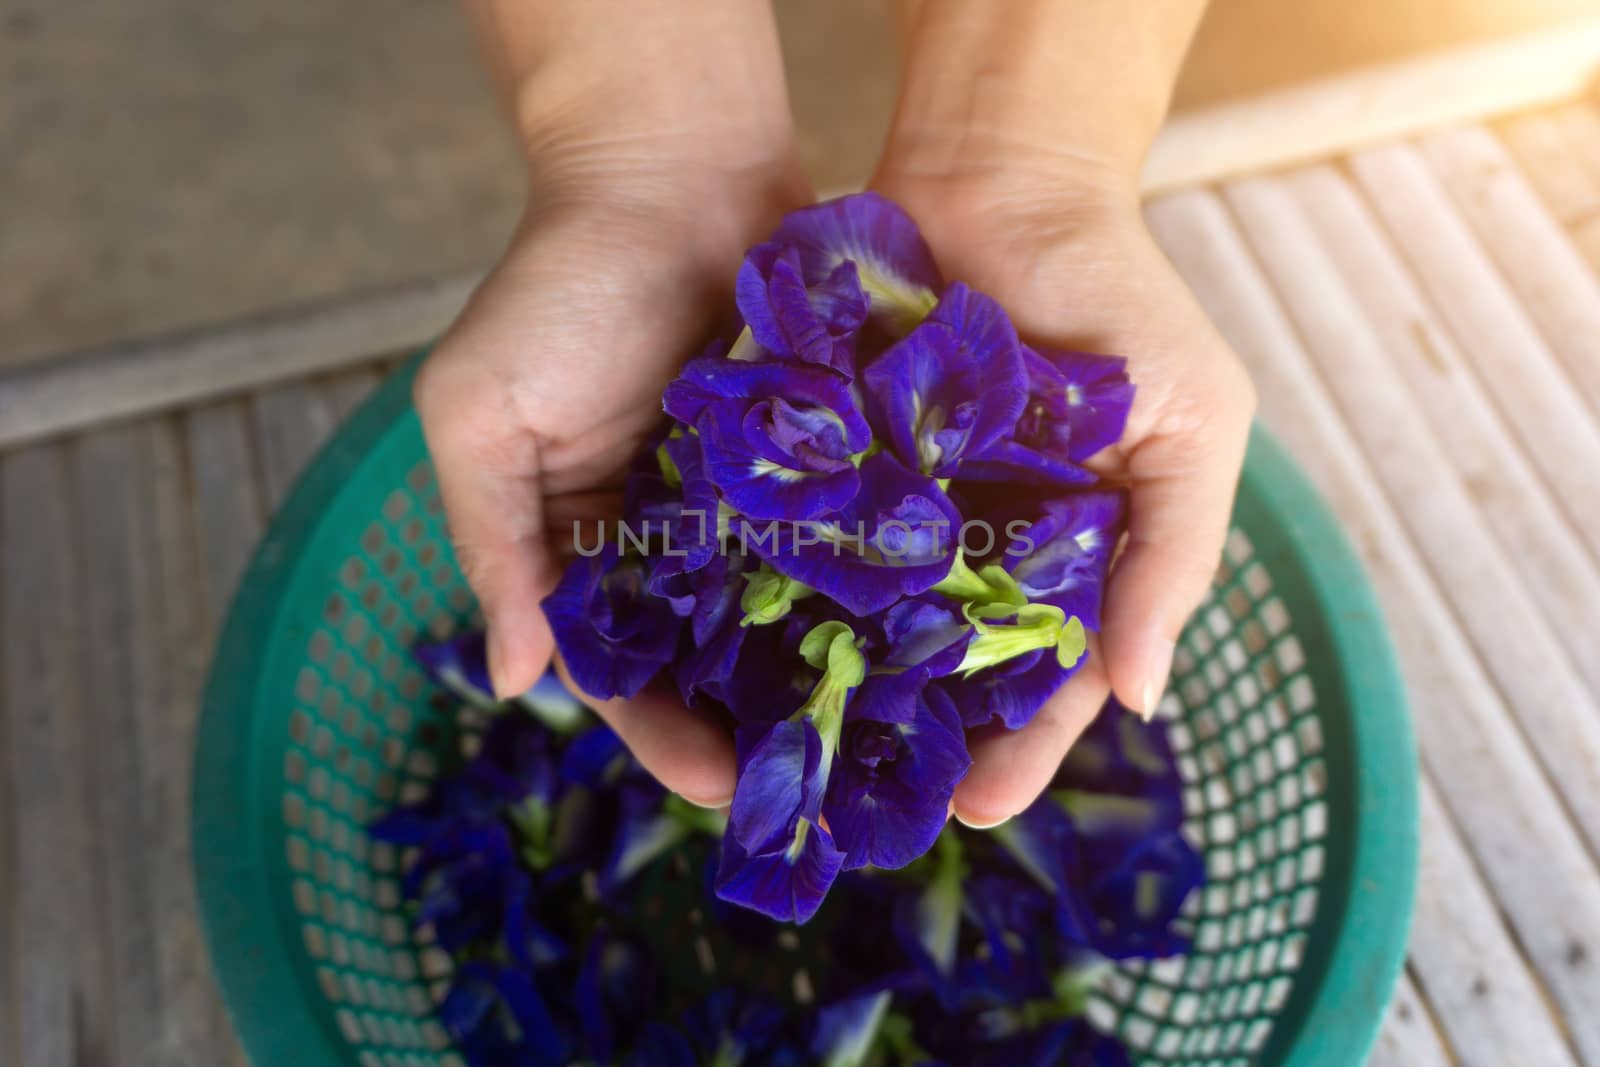 Hands are holding Clitoria ternatea or Fresh Butterfly pea flowe by pkproject